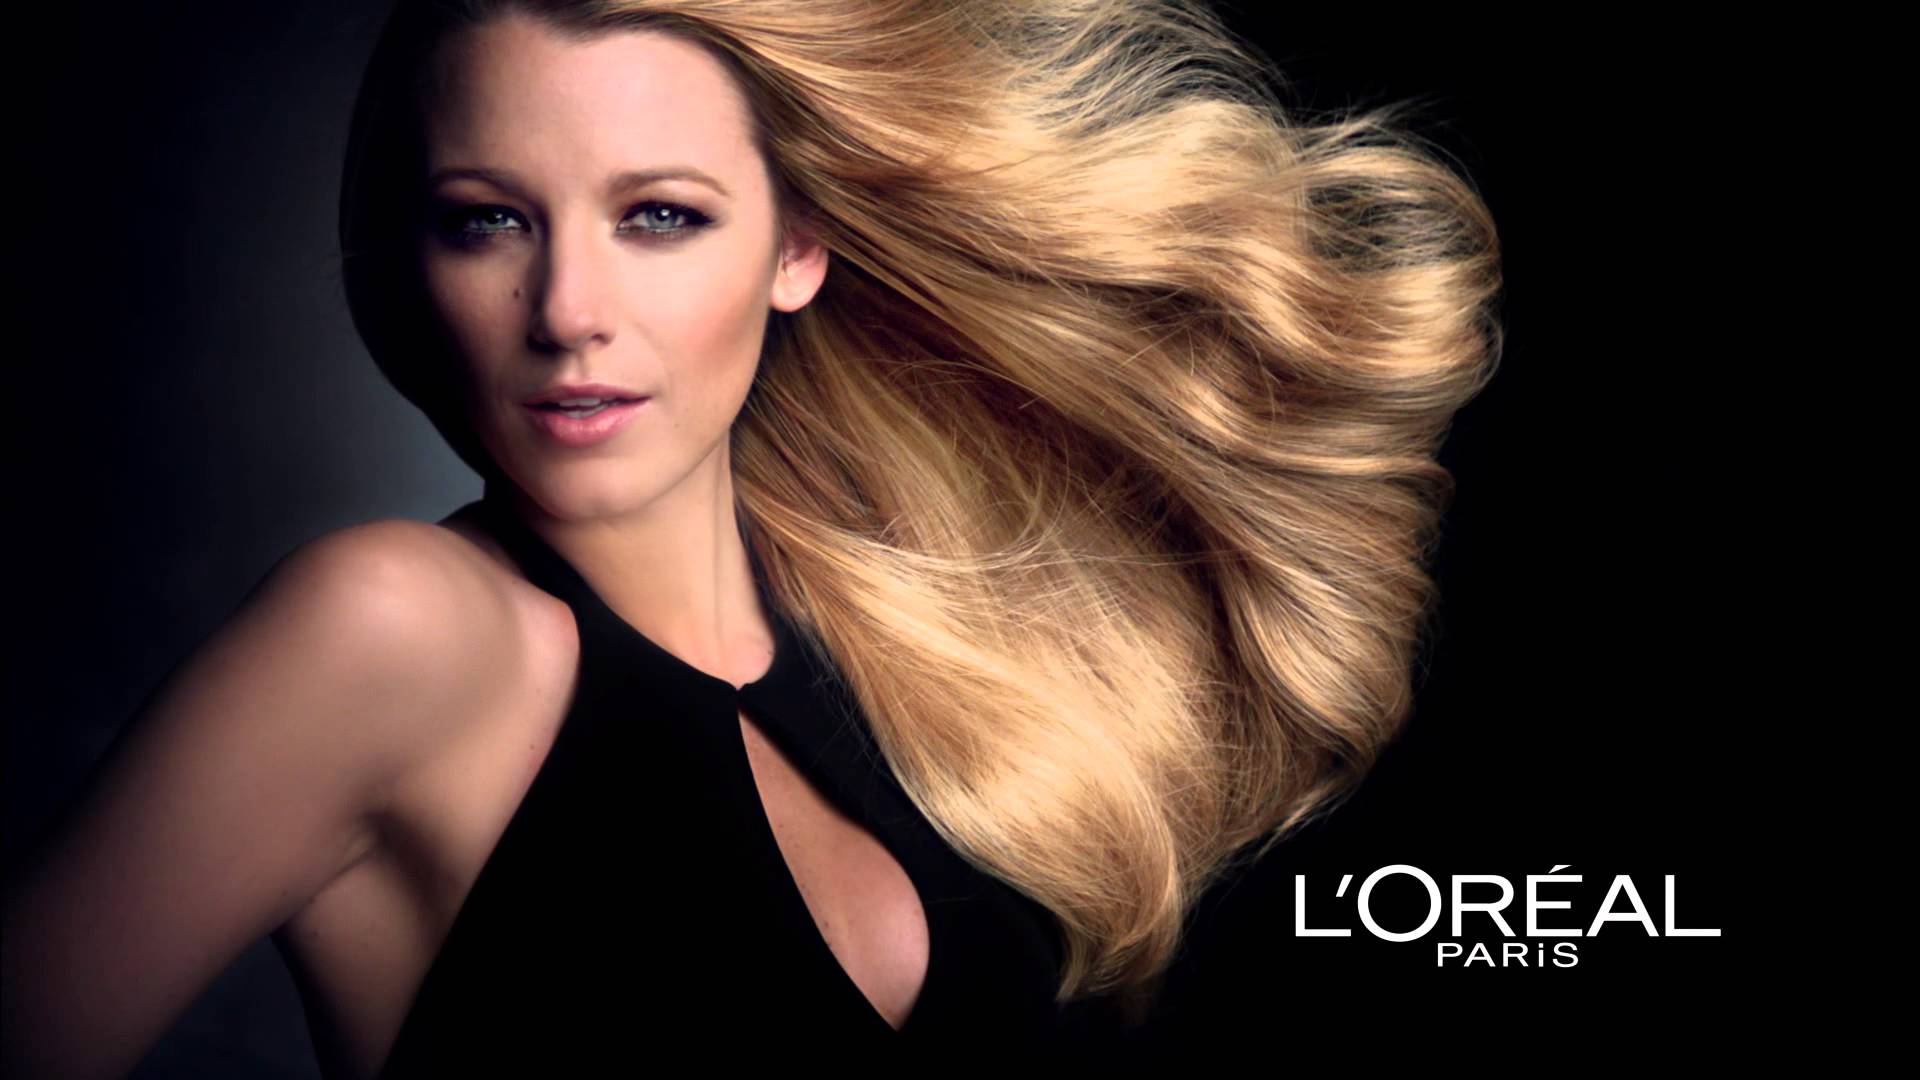 L'Oreal advertising banner